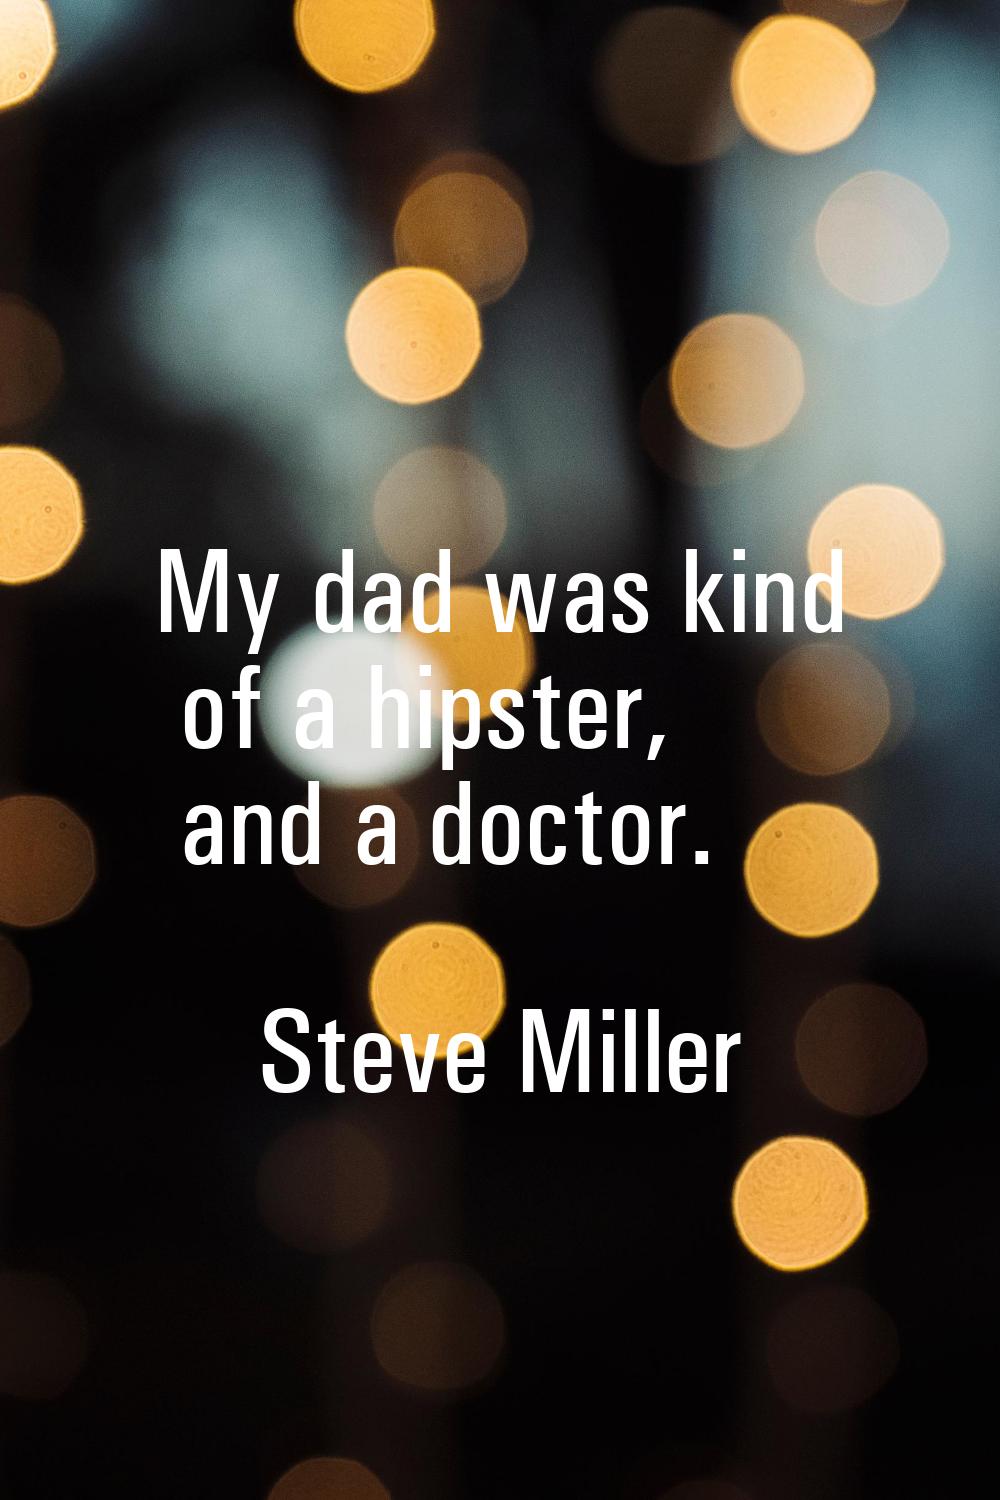 My dad was kind of a hipster, and a doctor.